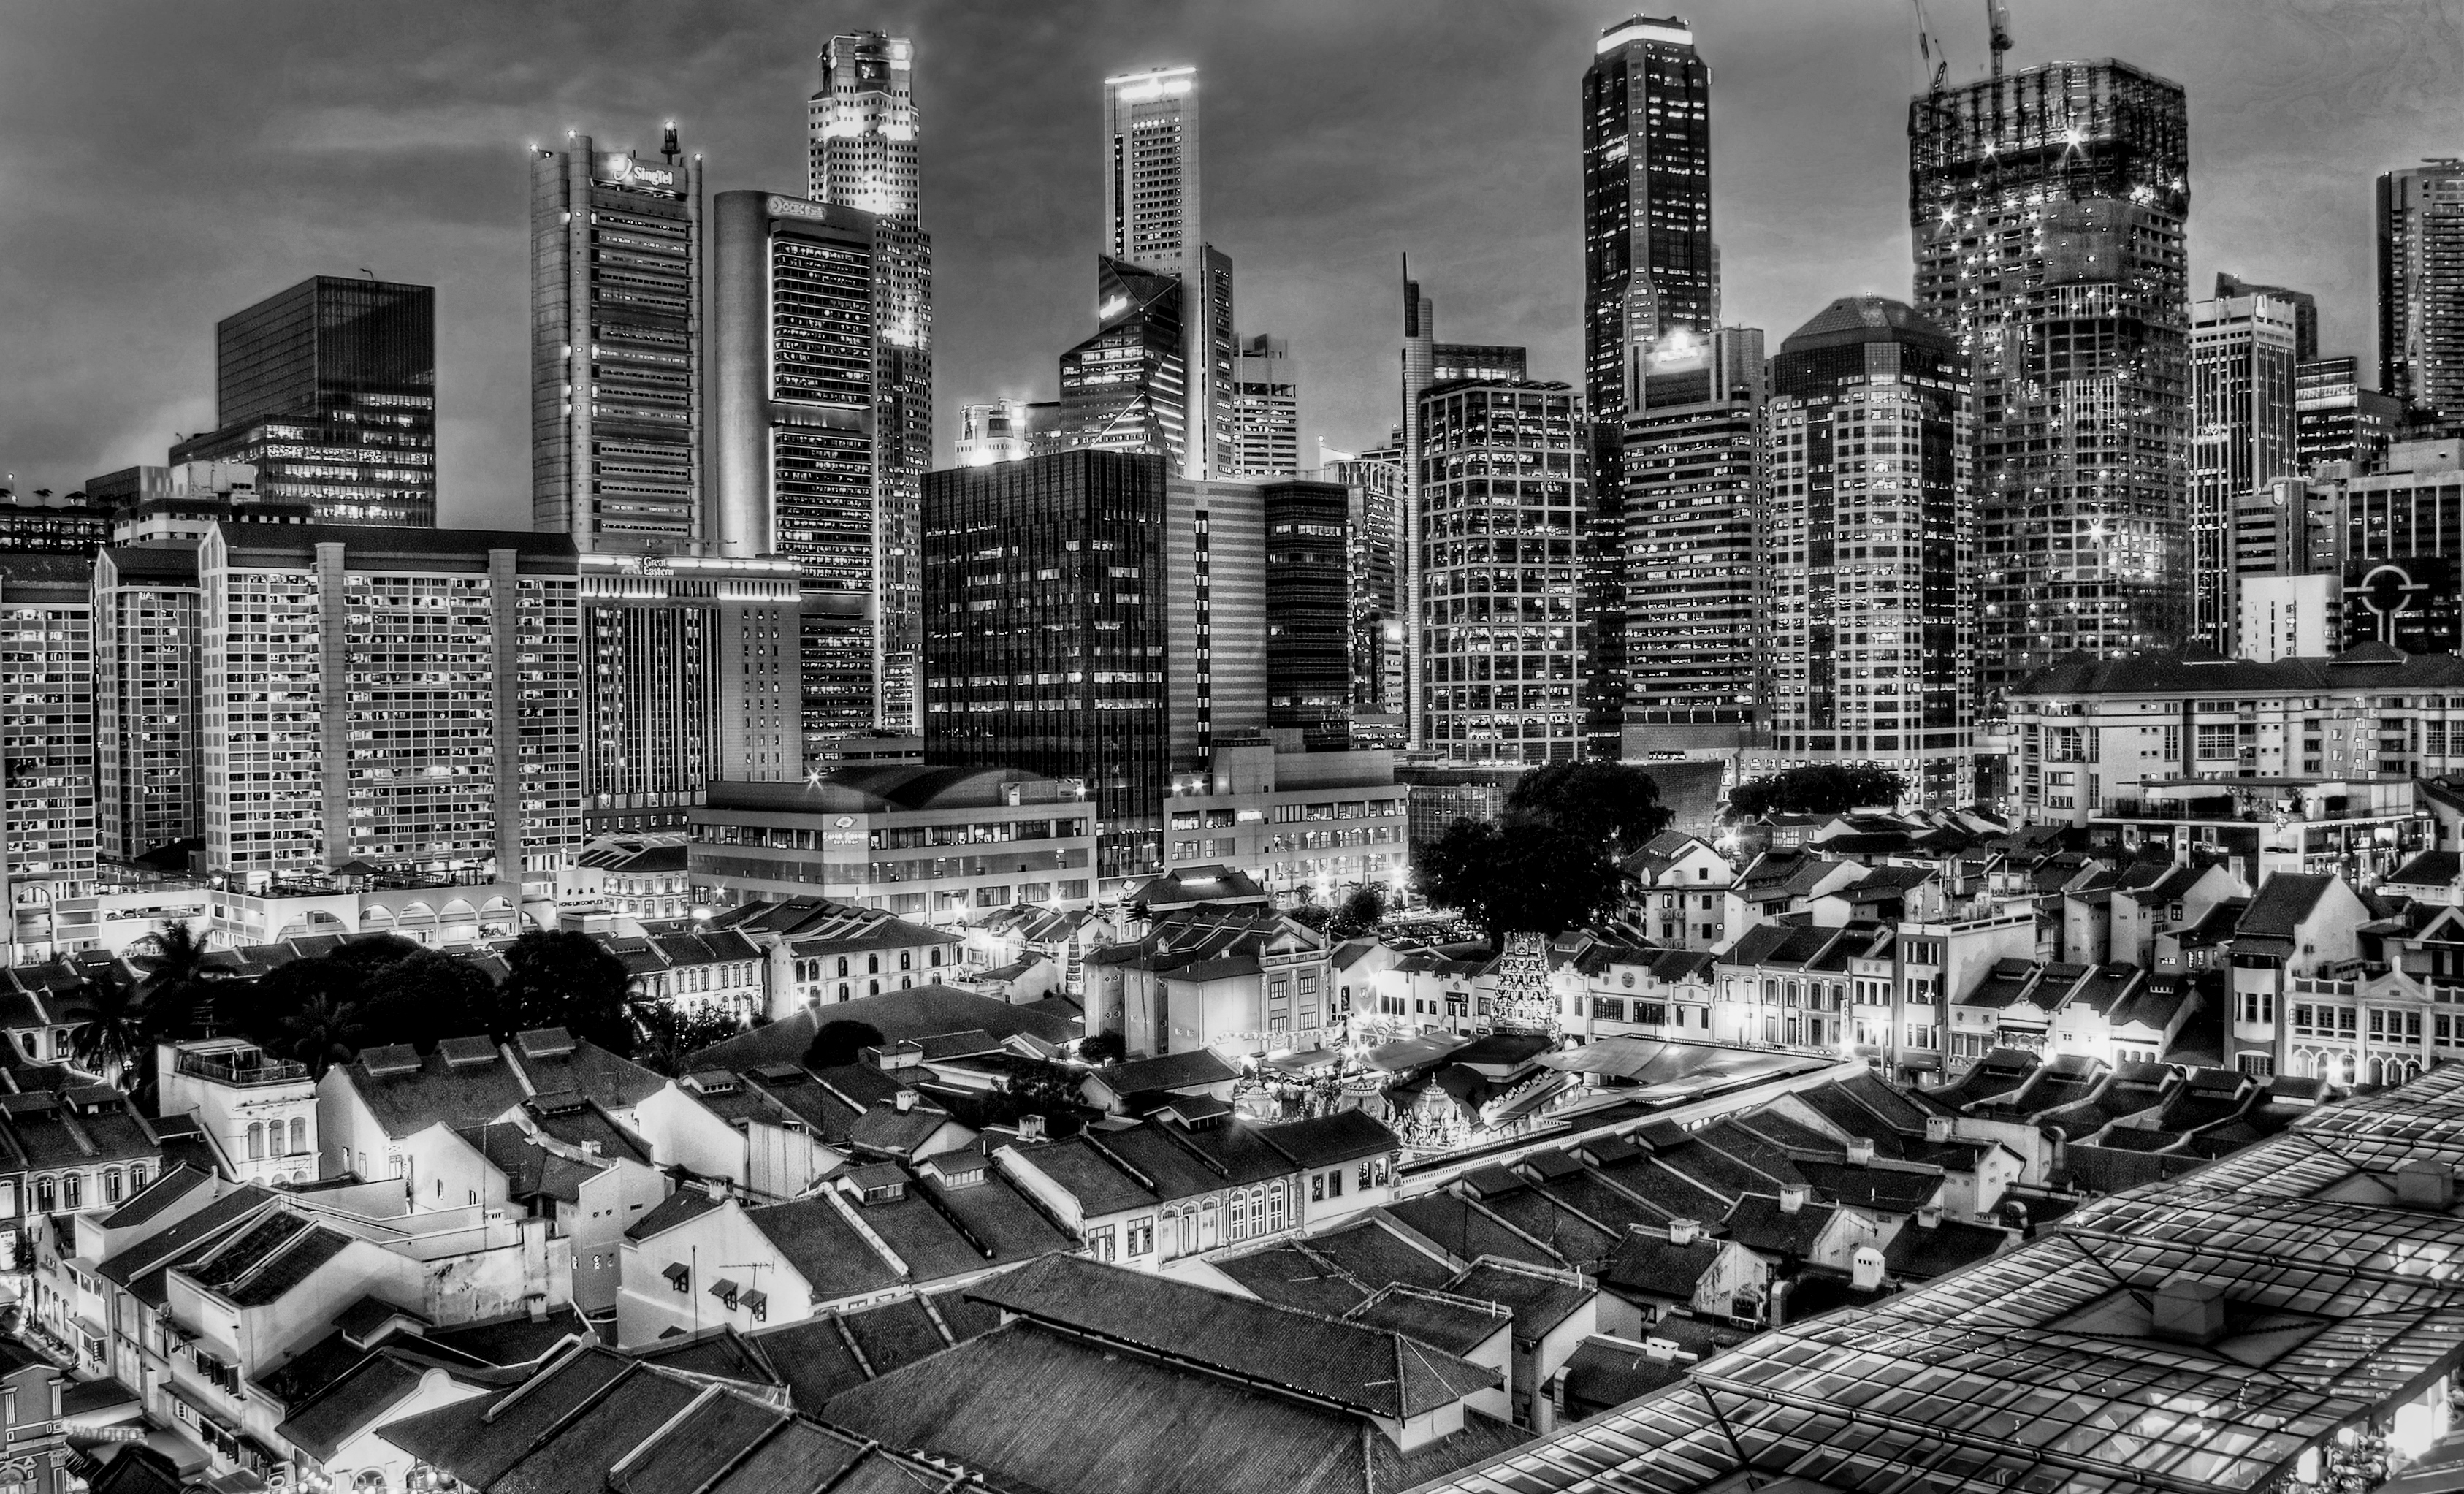 A view over city buildings in Singapore at night